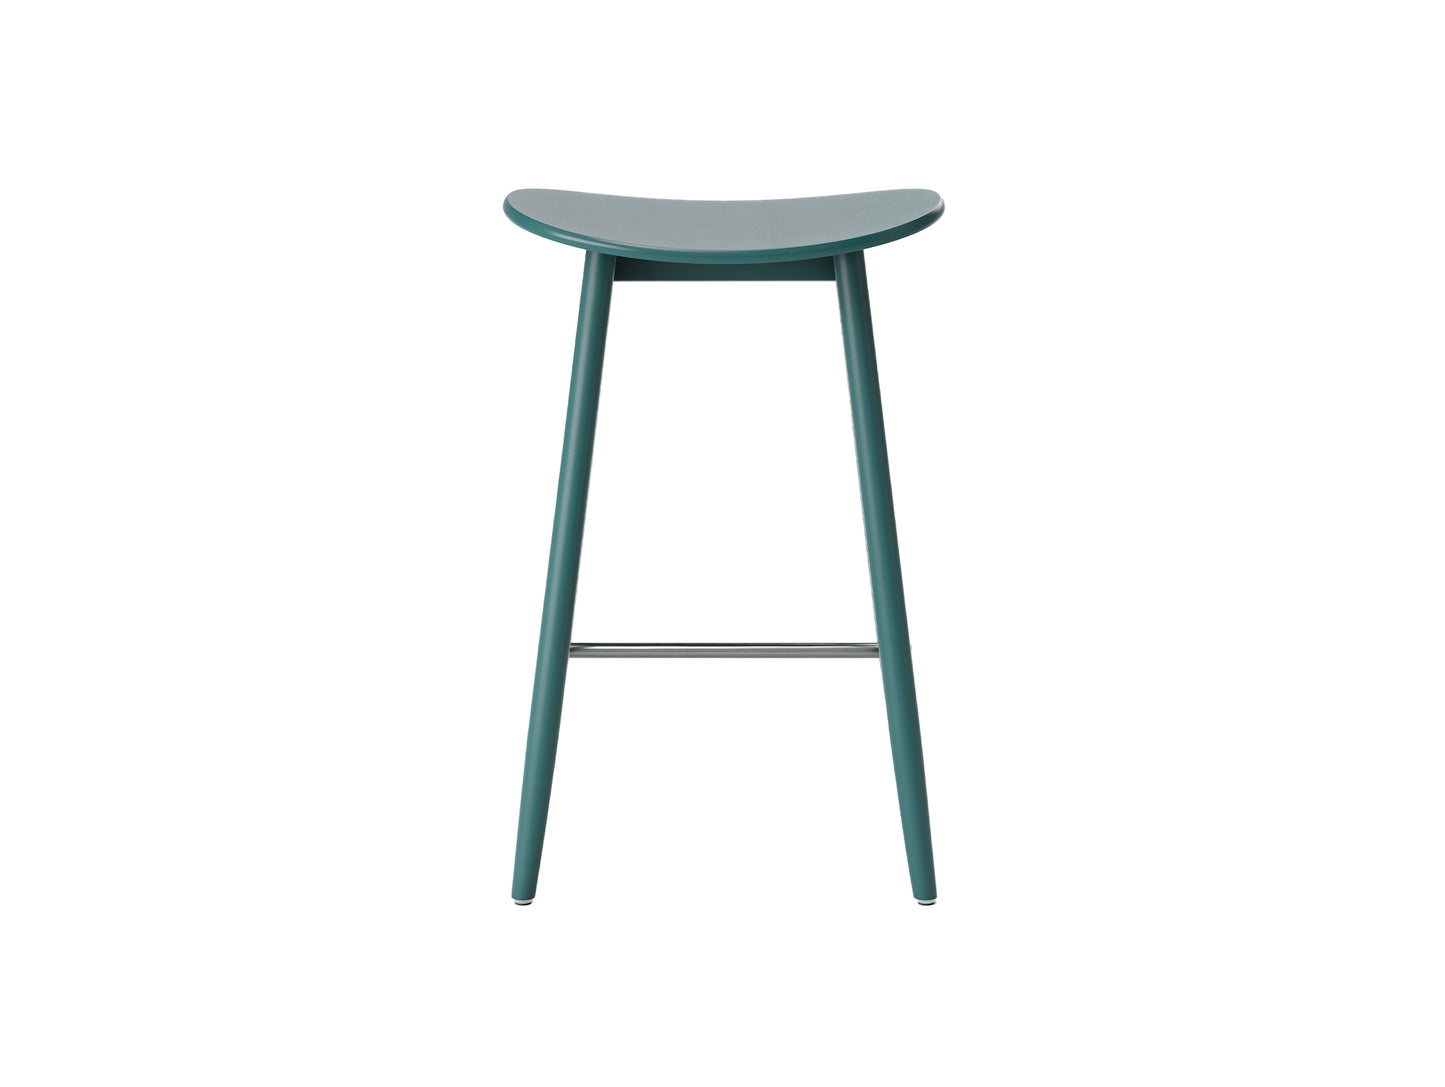 Icha Bar Stool by Massproductions - H650 / Library Green Lacquered Beech